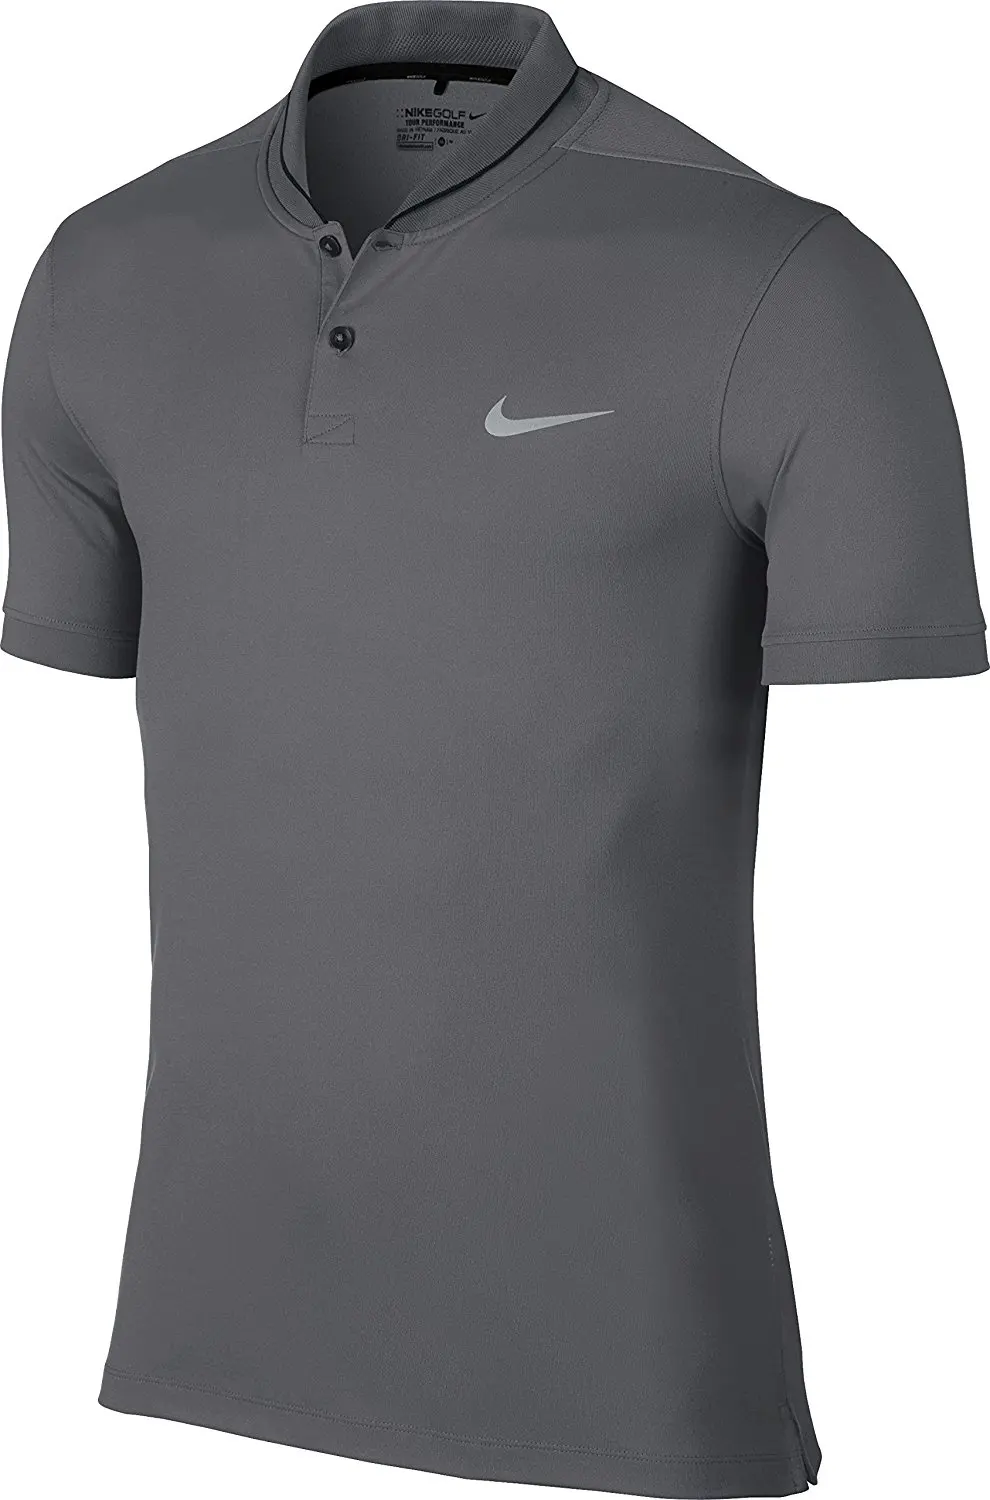 Buy Nike 2016 Modern Fit Transition Dry 